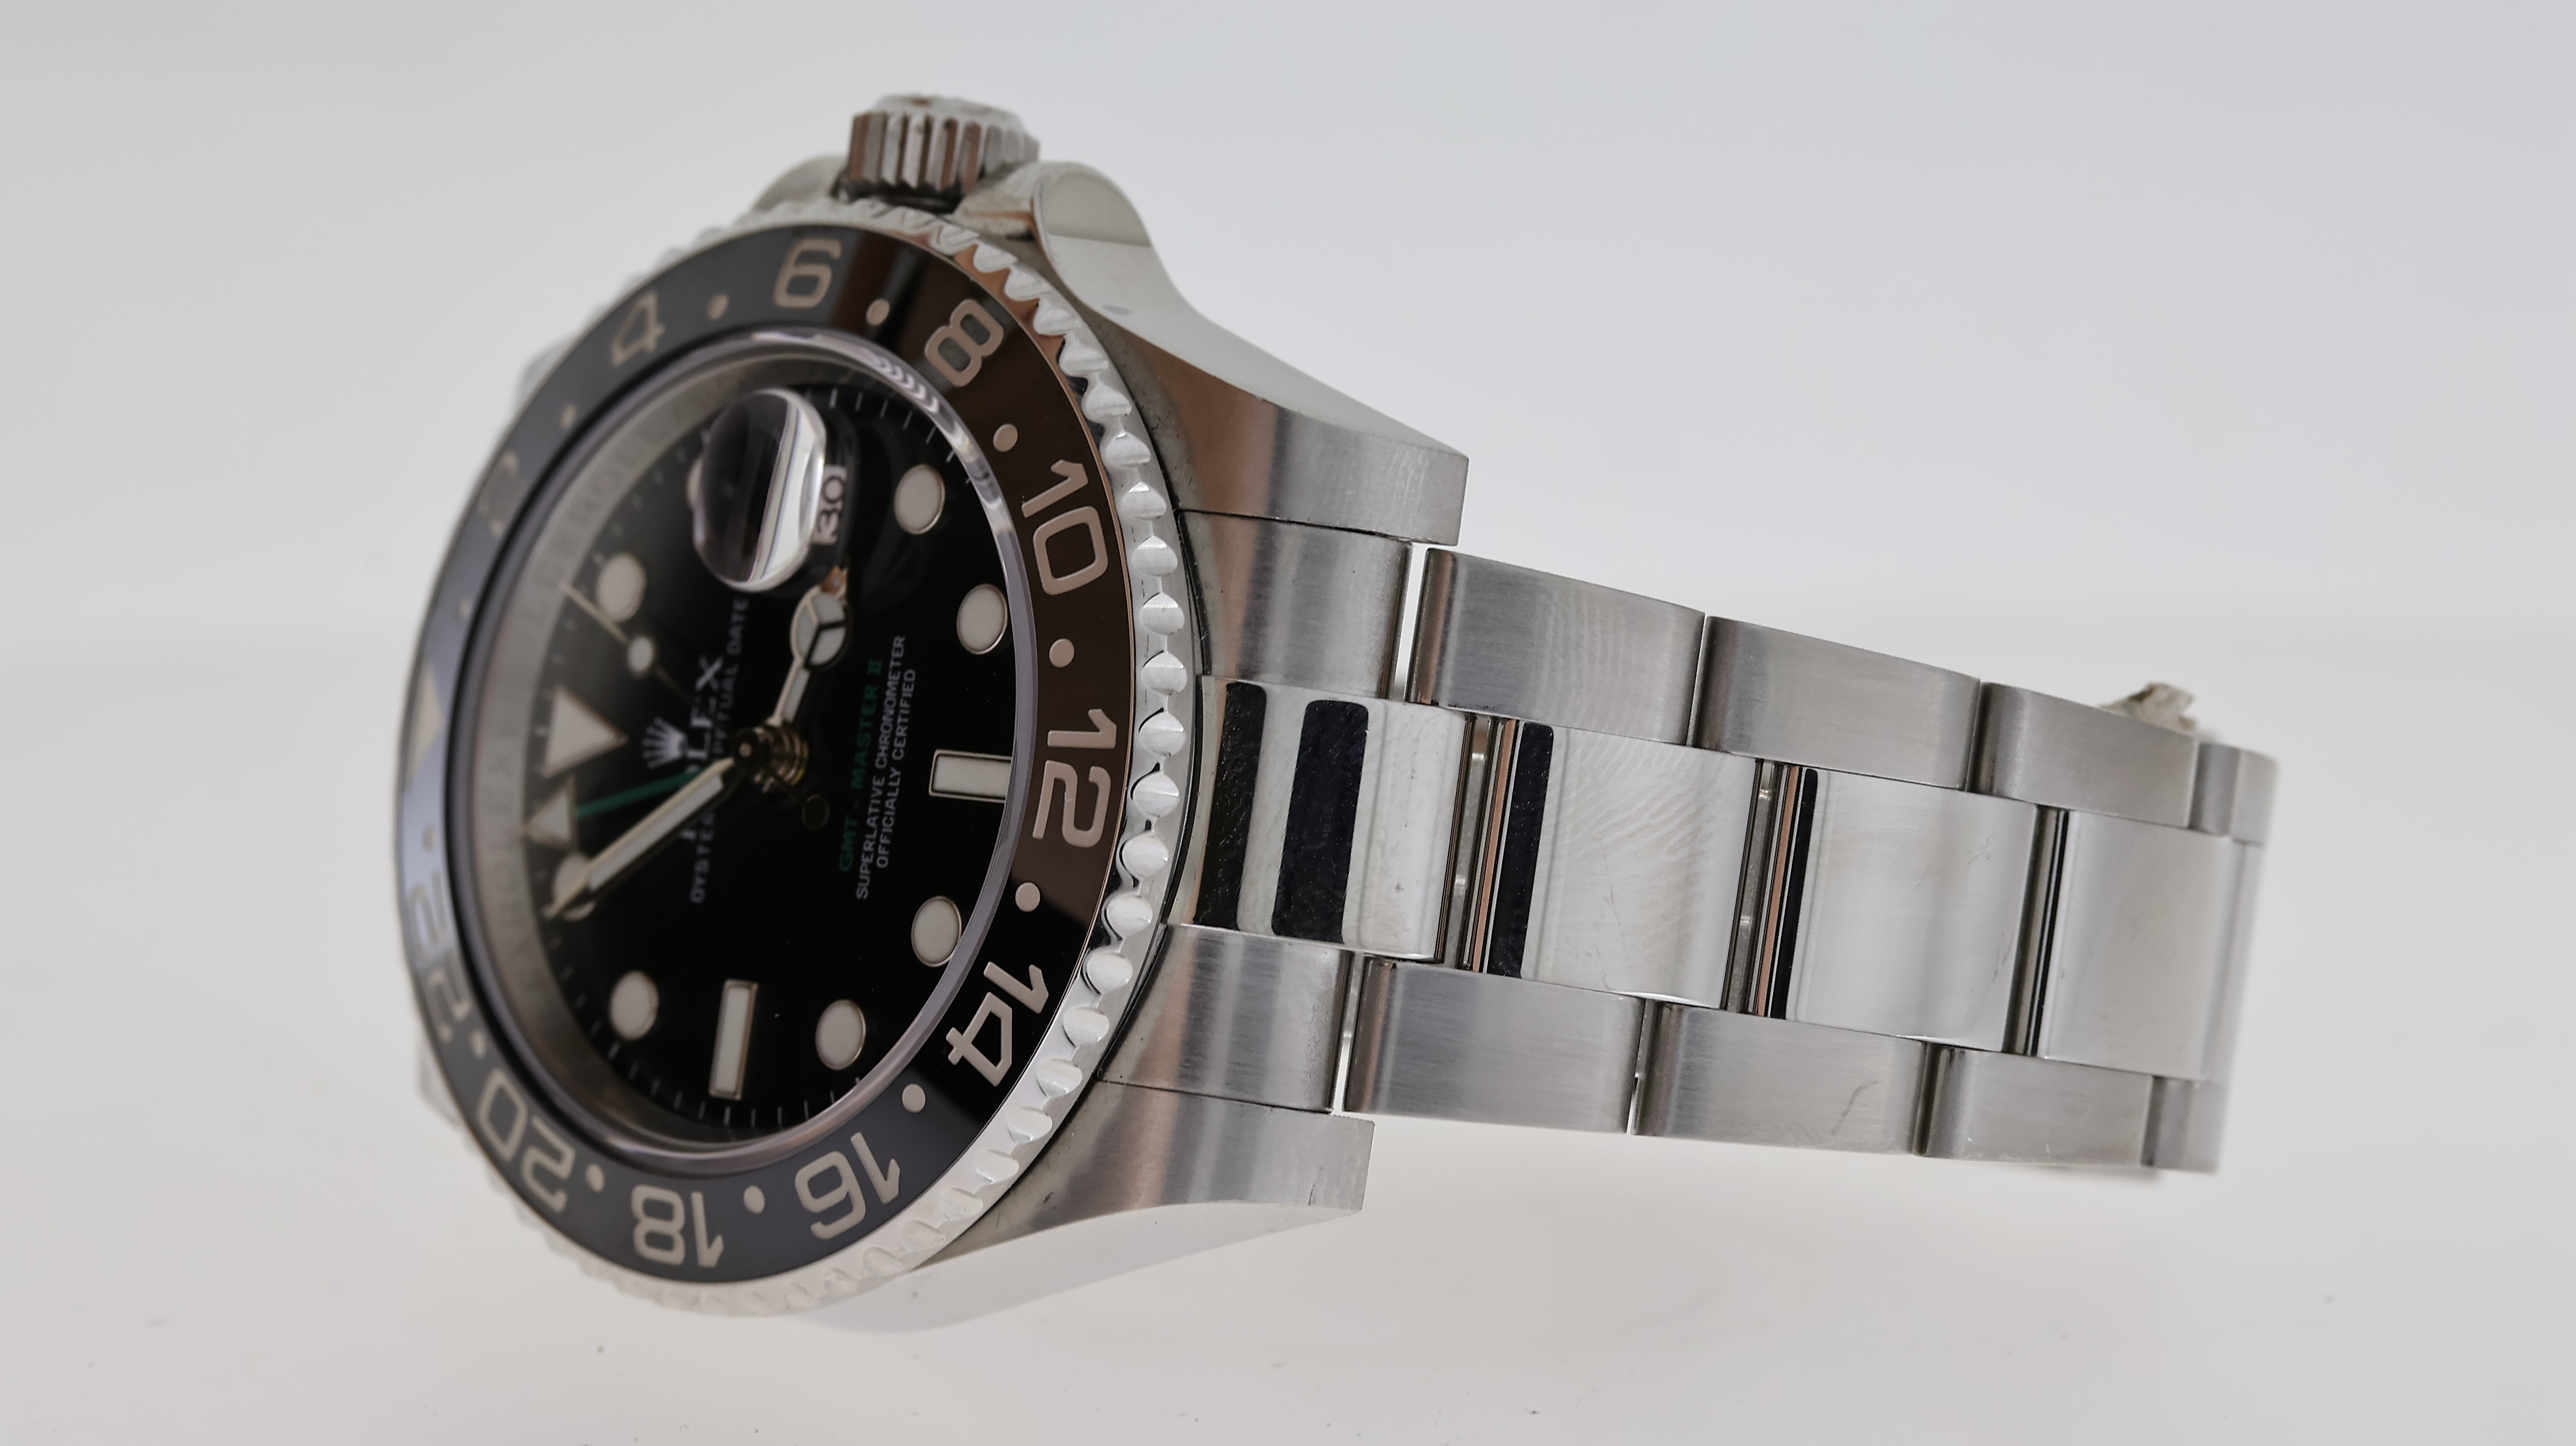 ROLEX GMT MASTER II REFERENCE 116710 - Image 3 of 10